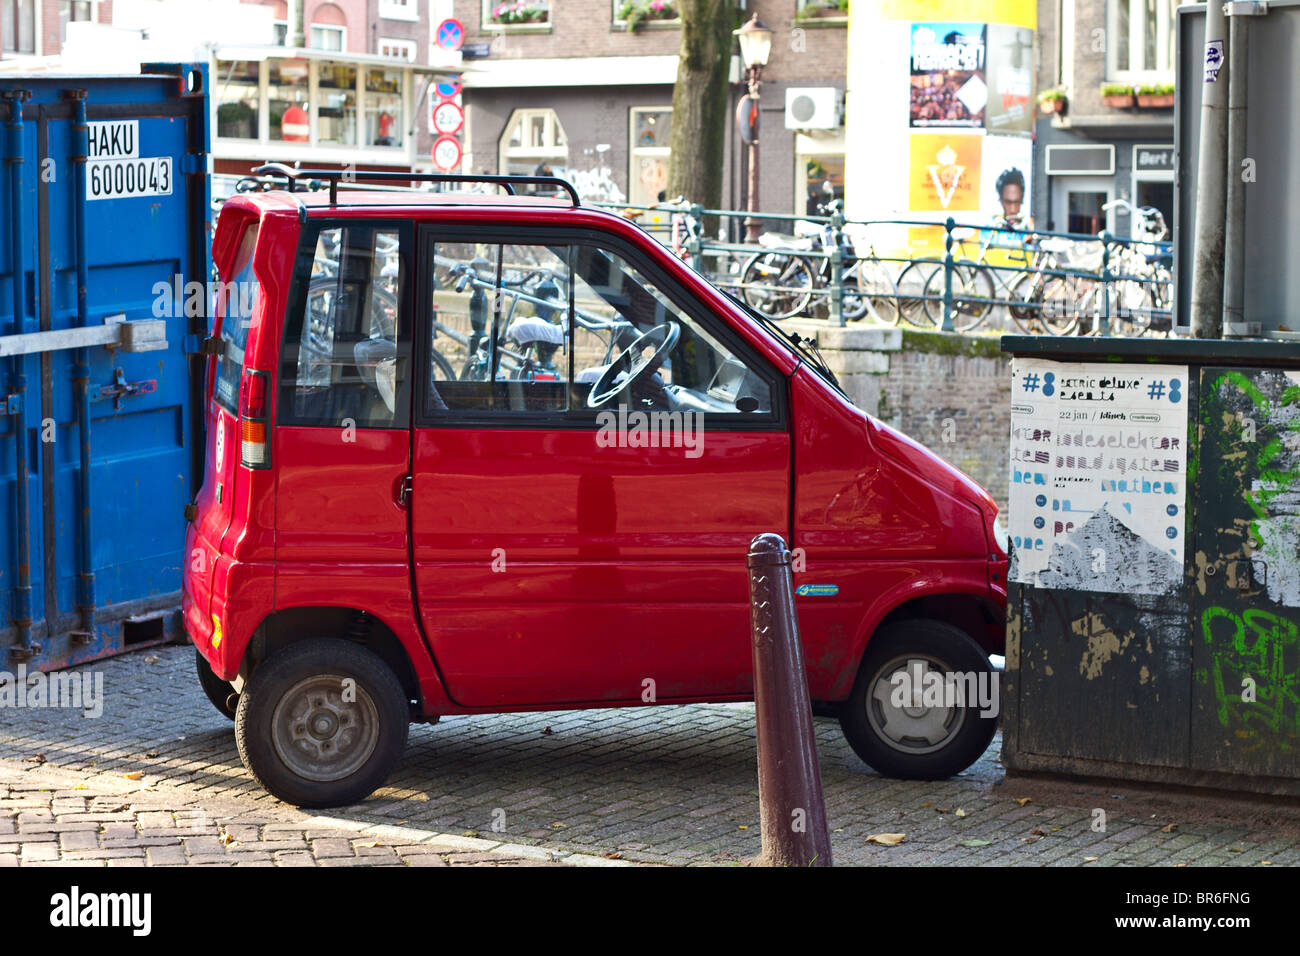 Red Canta LX car parked in small parking space. Amsterdam, Holland Stock Photo